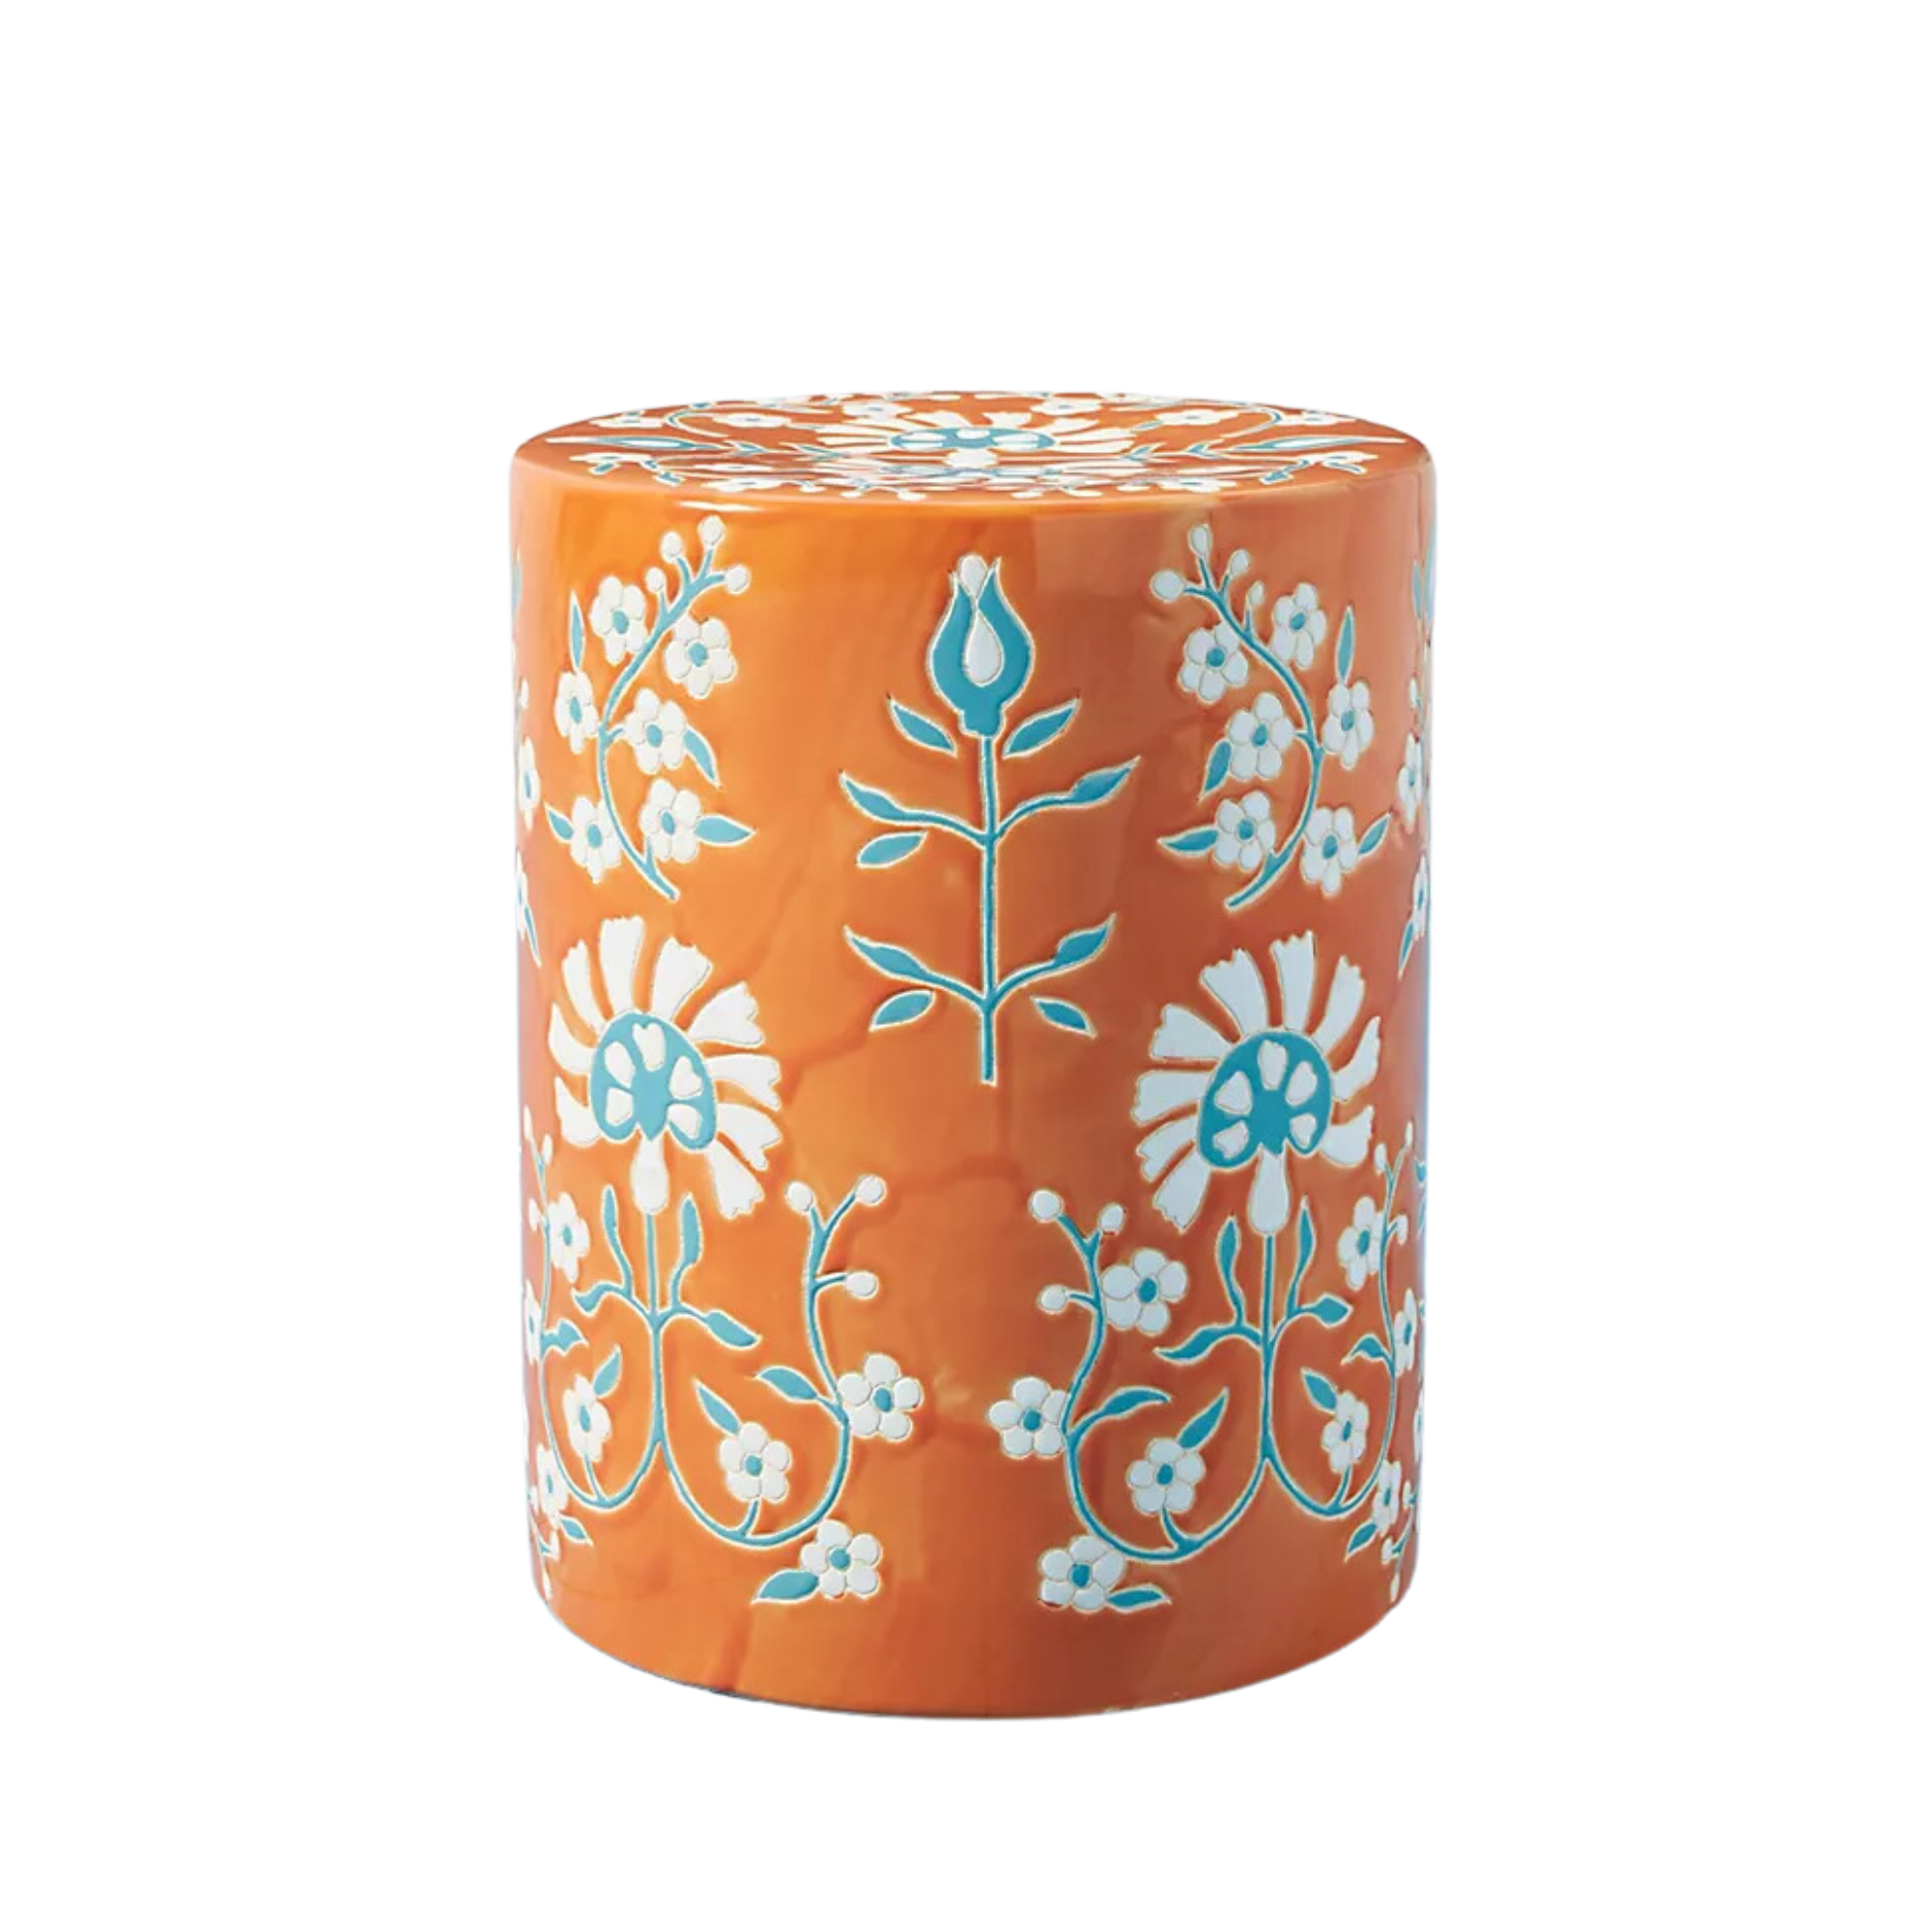 An orange and blue outdoor side table